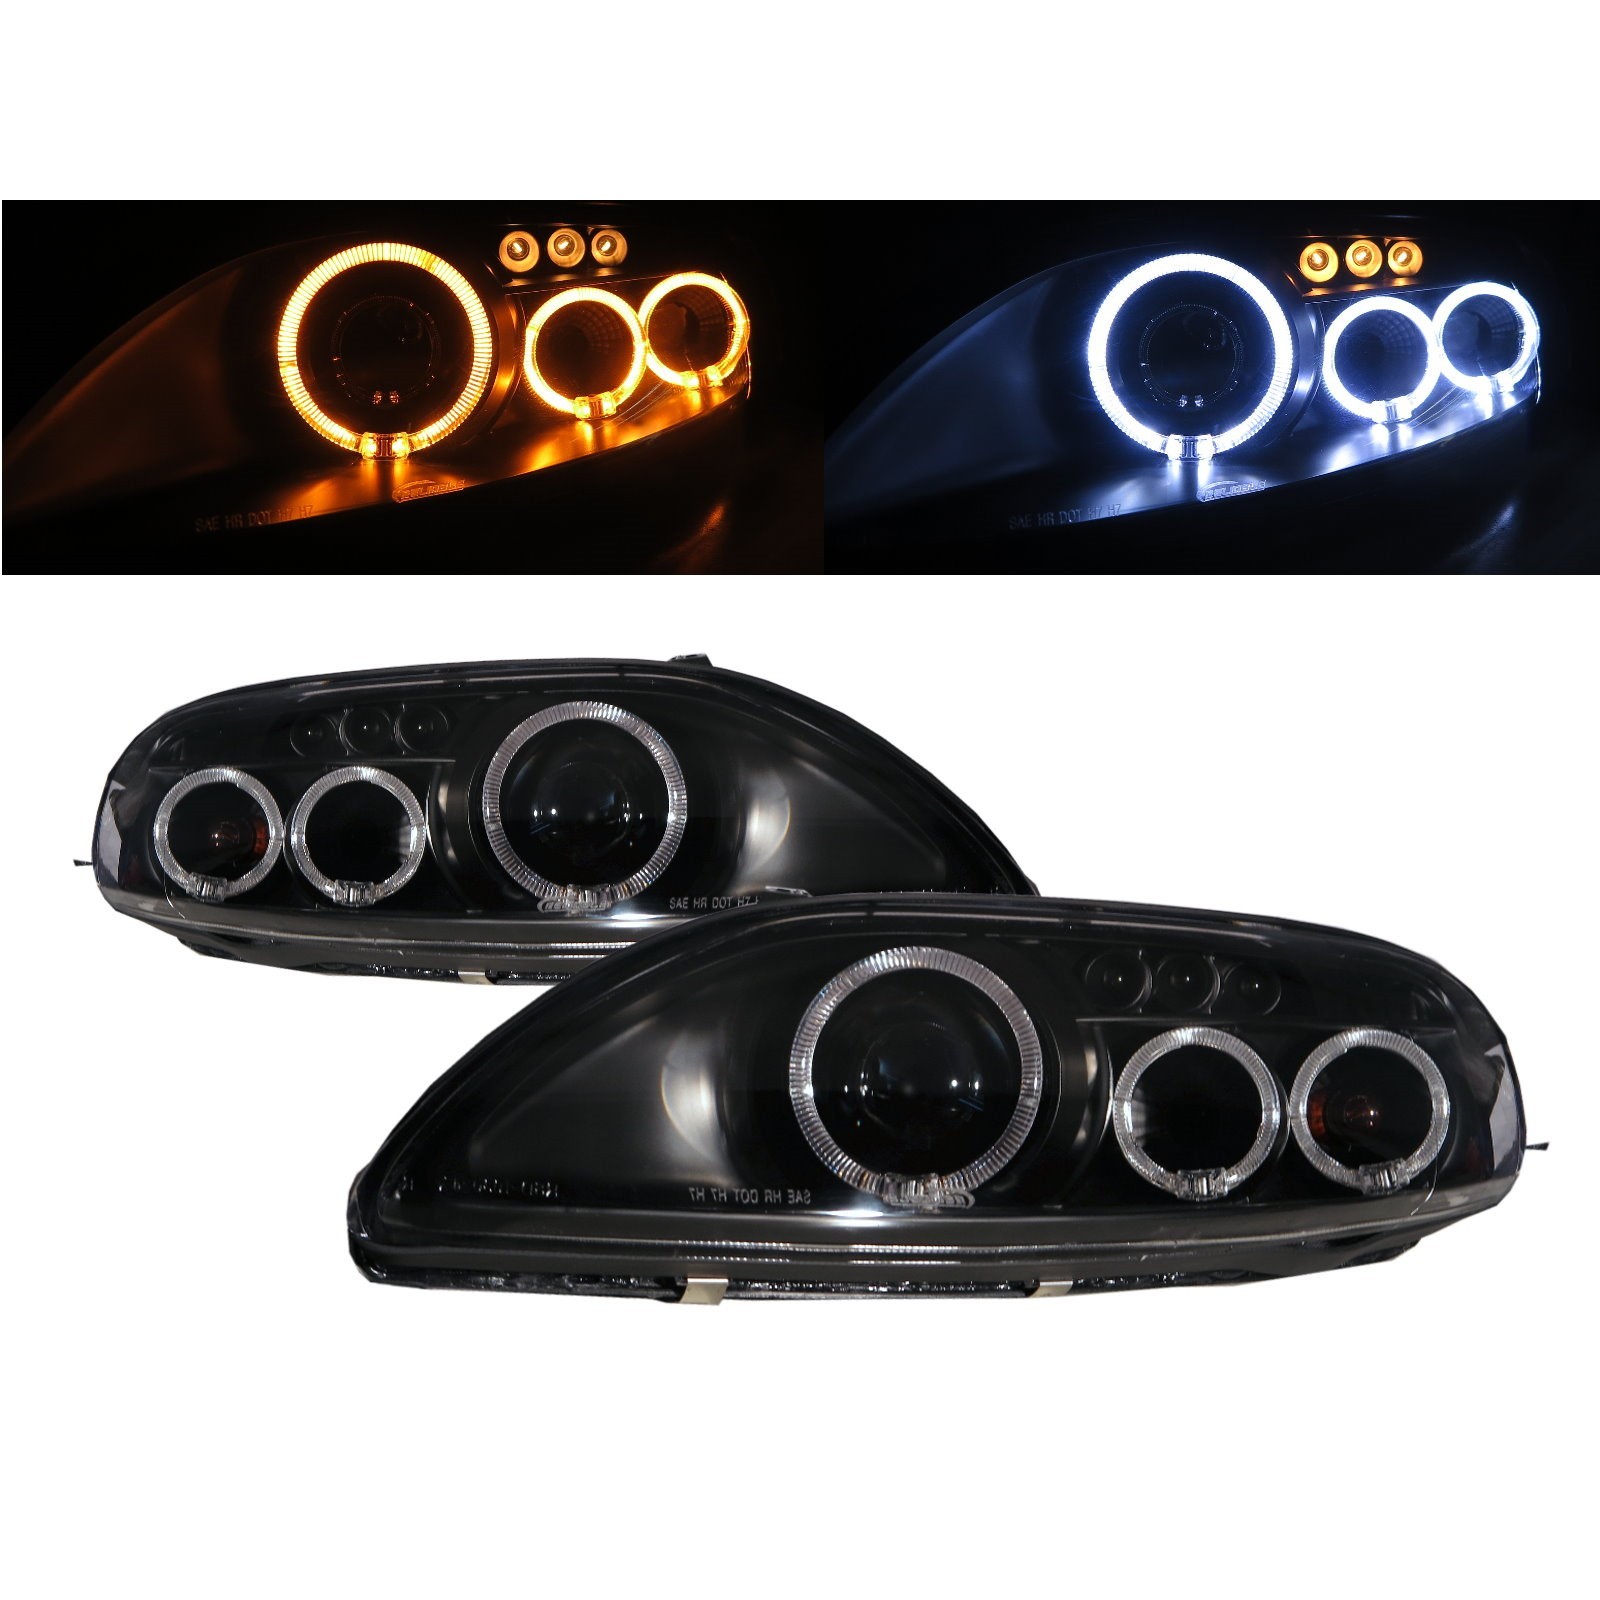 CrazyTheGod SC-seires SC300/SC400 Z30 First generation 1992-2000 Coupe 2D Guide LED Angel-Eye Projector Headlight Headlamp Black for LEXUS LHD